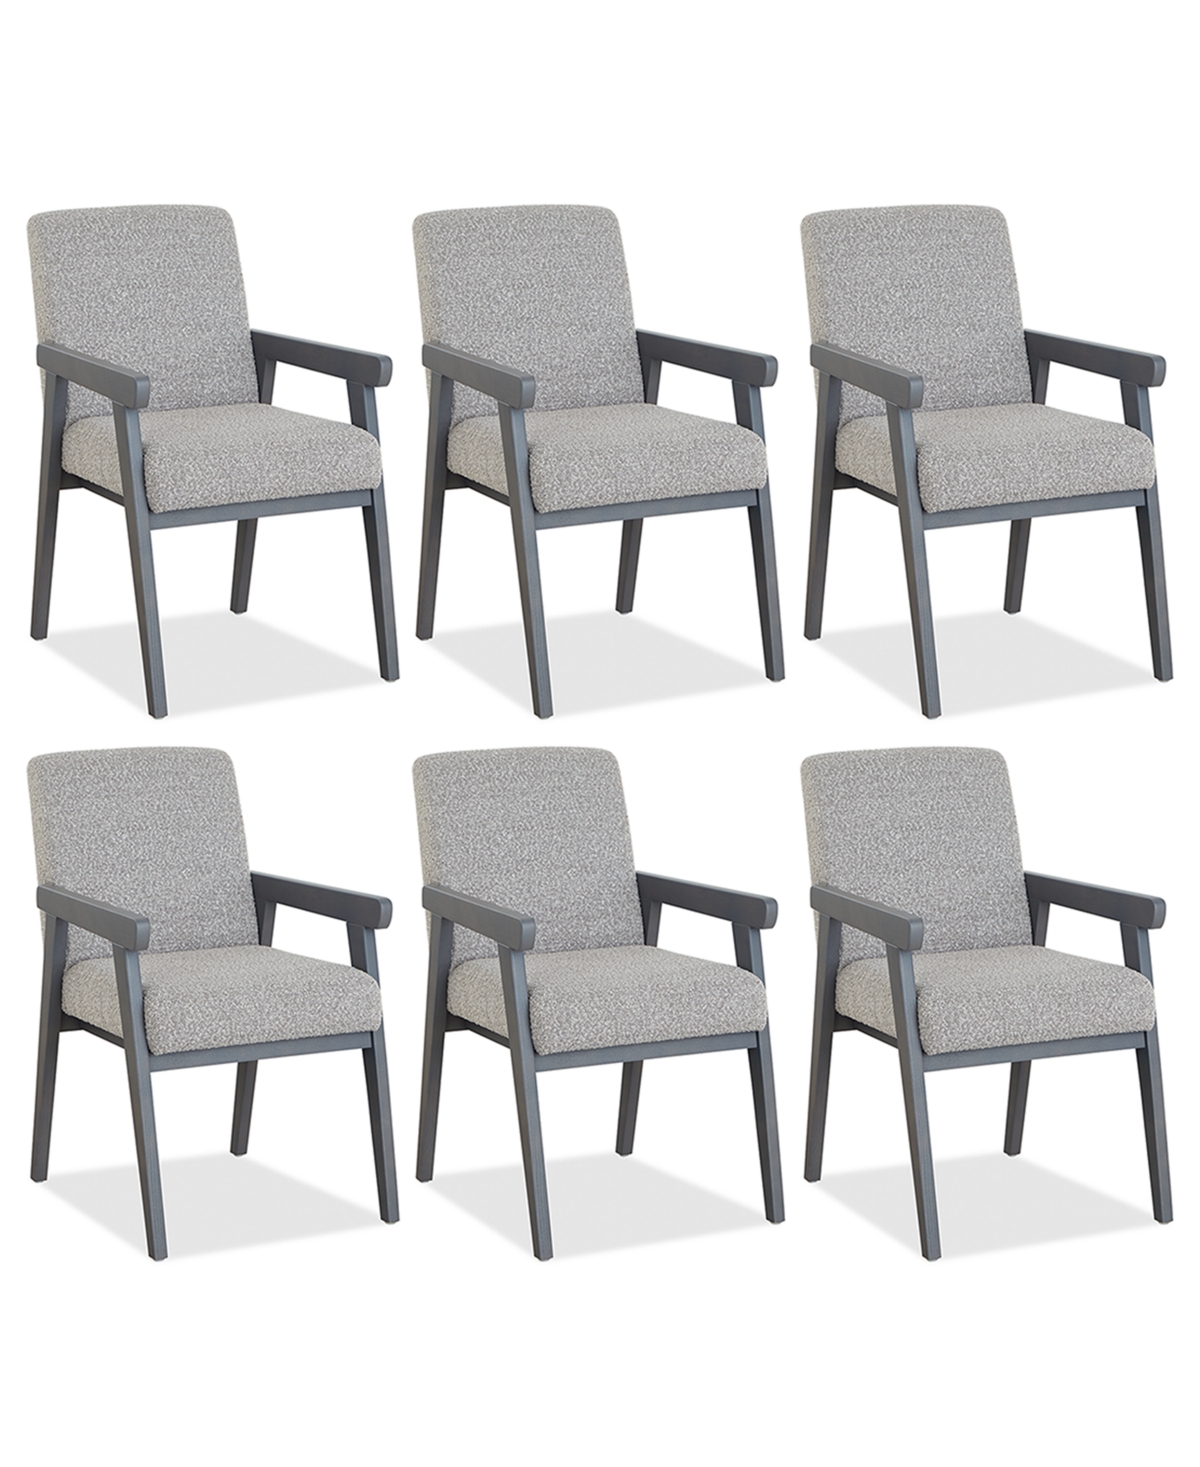 Shop Drexel Atwell 6pc Arm Chair Set In No Color